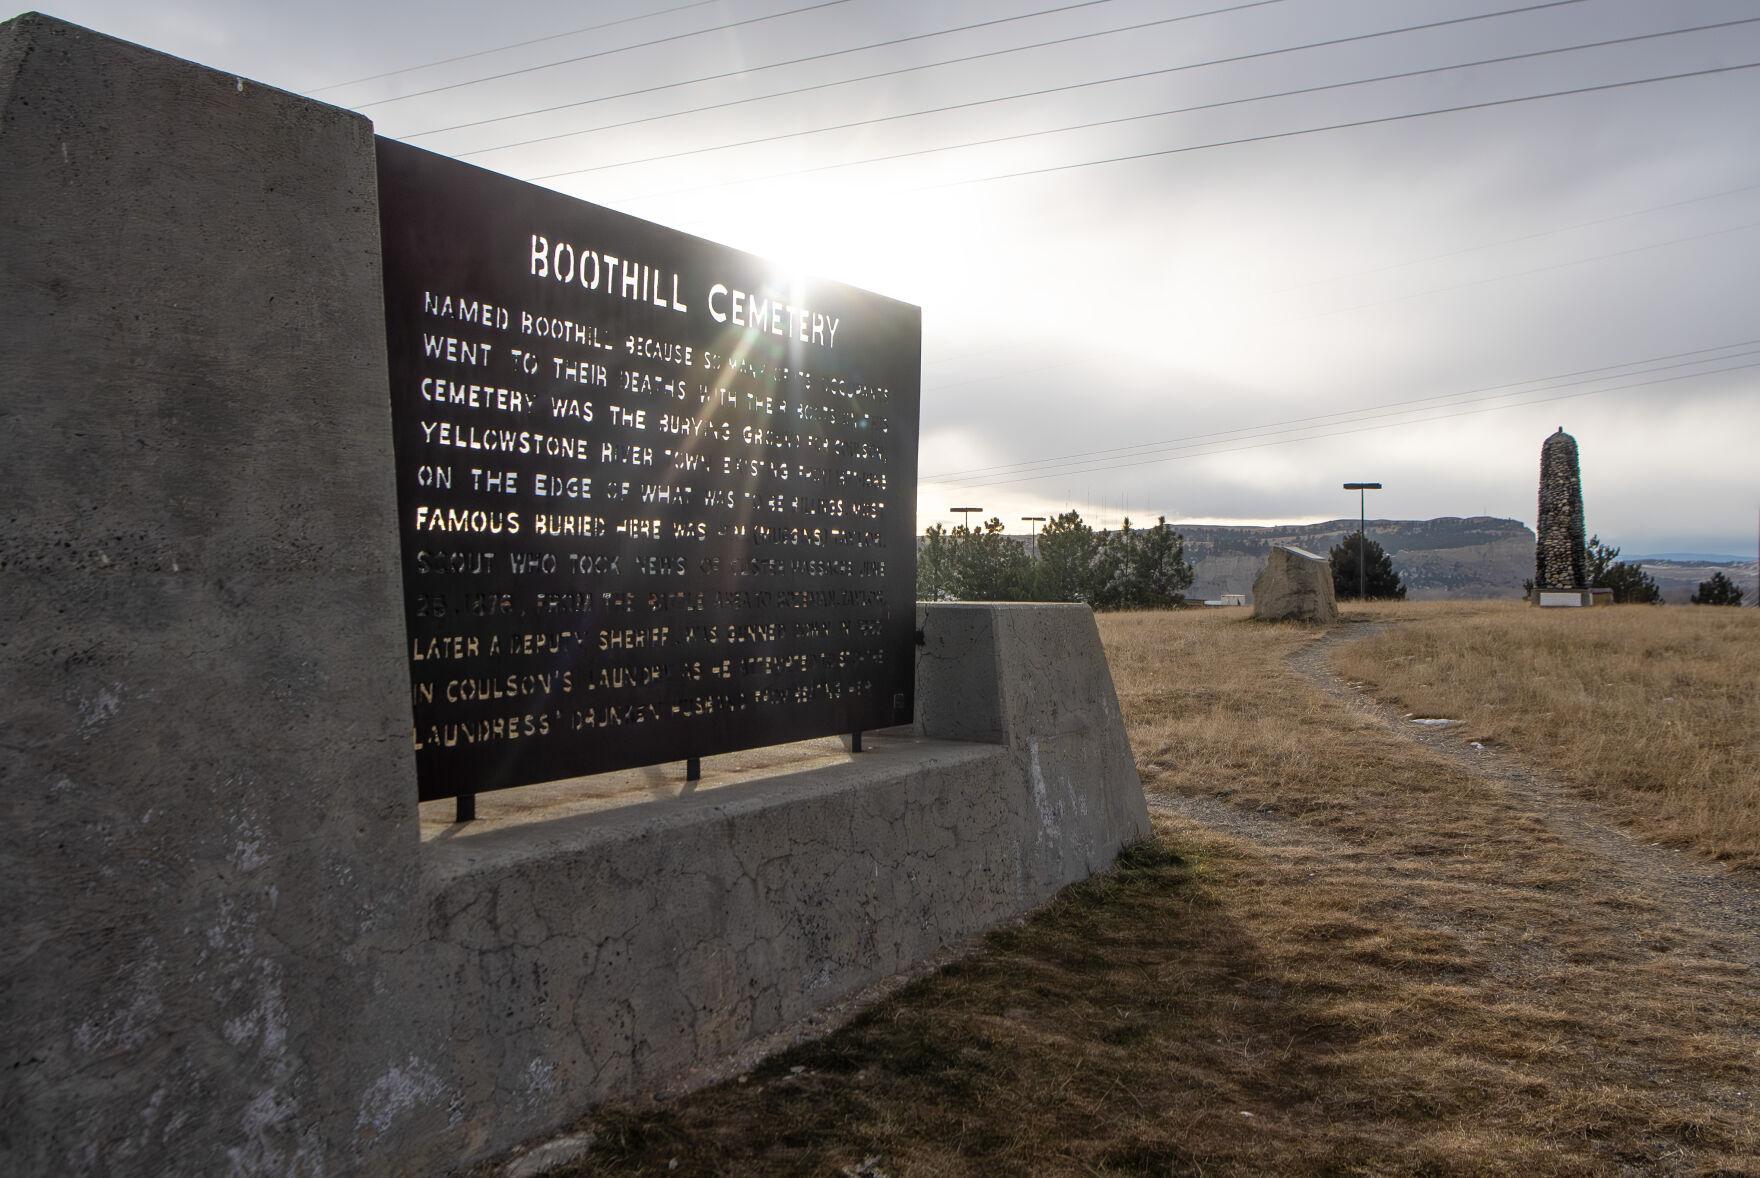 REVIVING HISTORY: THE COULSON ‘BOOTHILL’ CEMETERY RESTORATION PROJECT